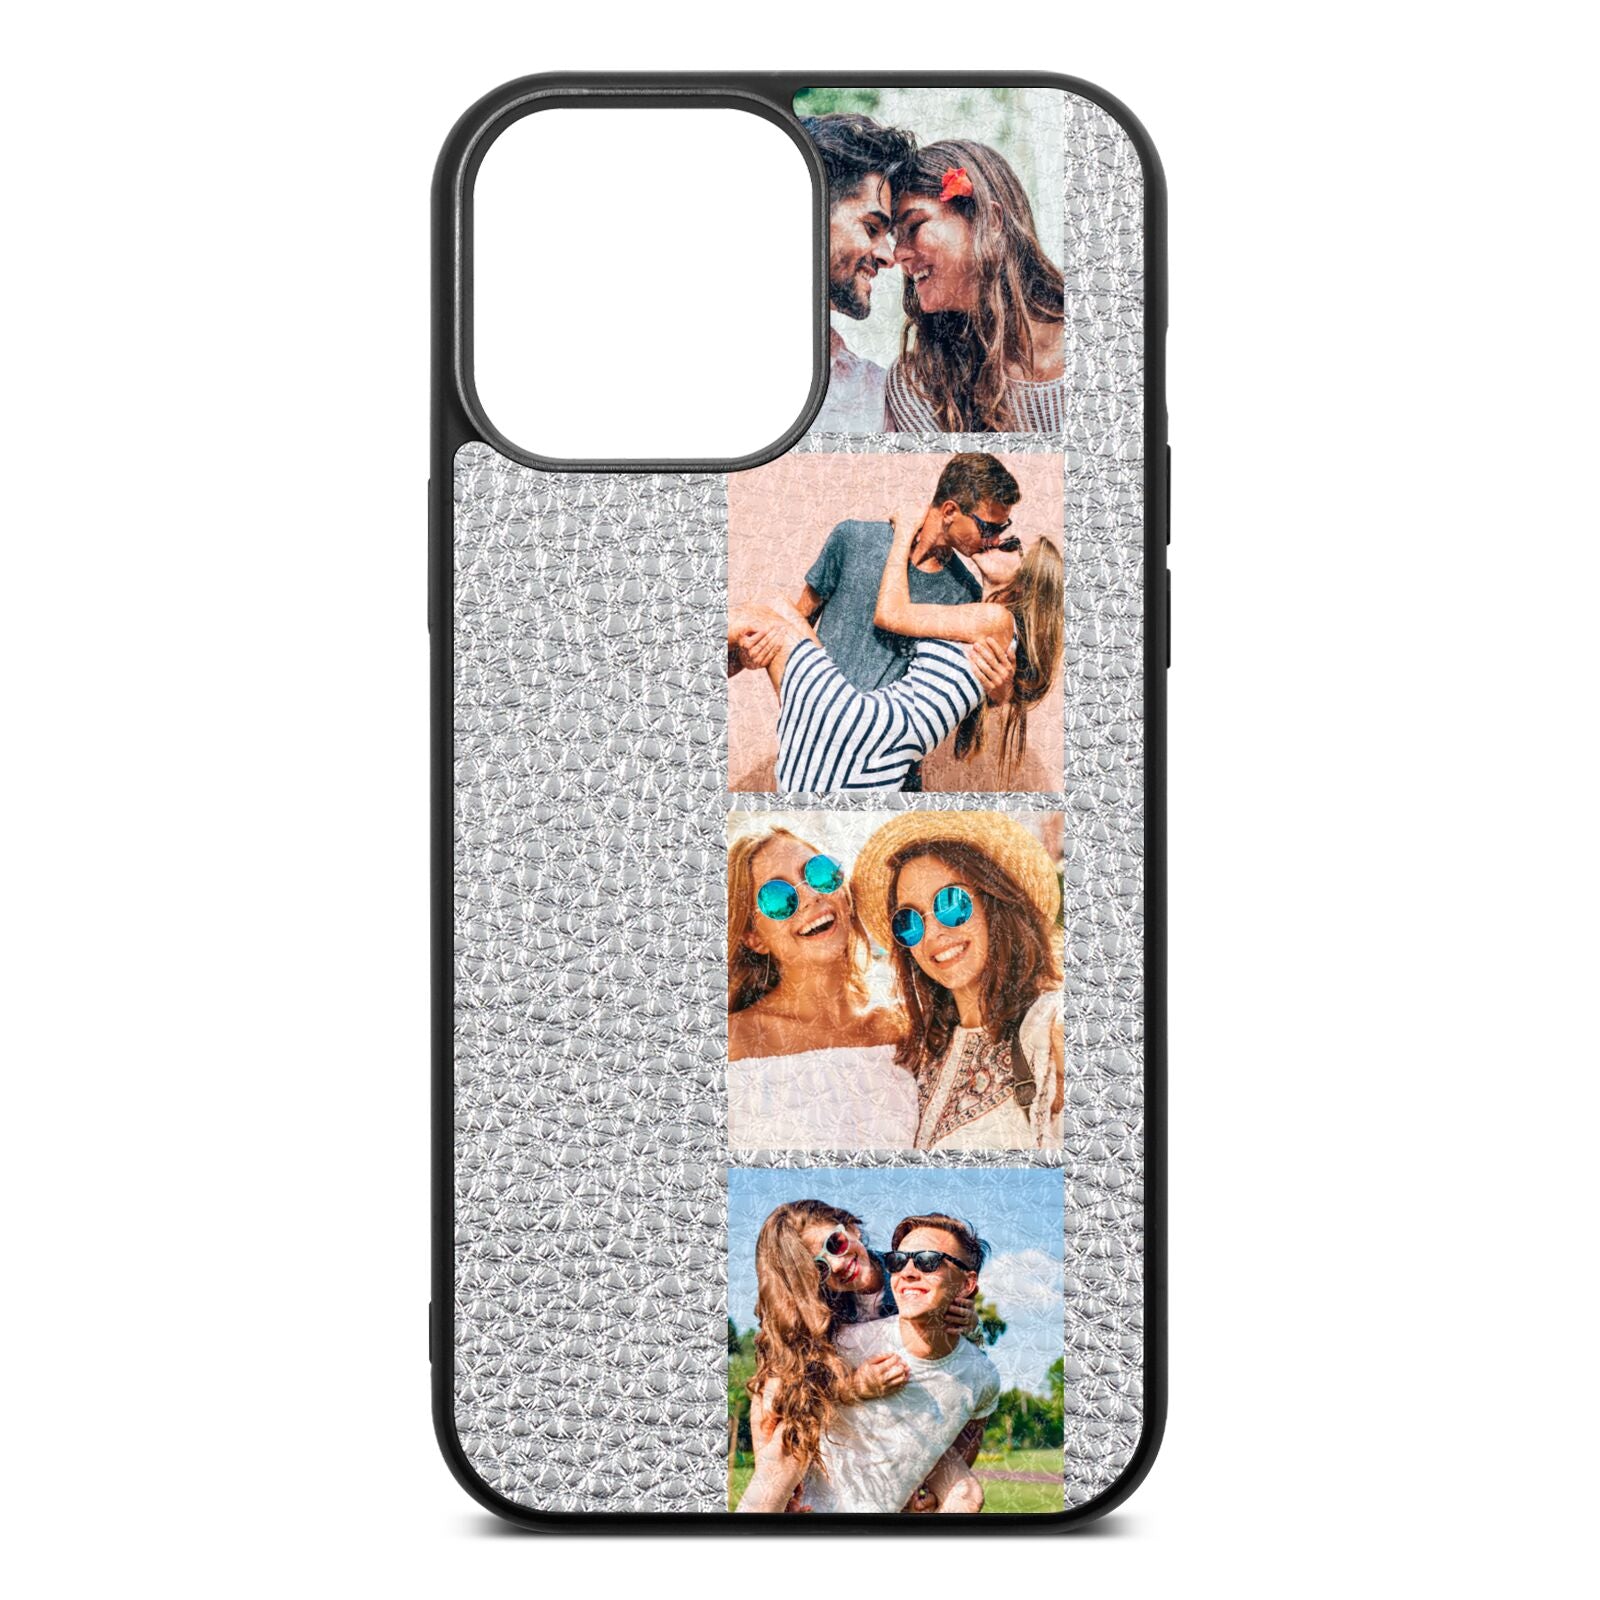 Photo Strip Montage Upload Silver Pebble Leather iPhone 13 Pro Max Case